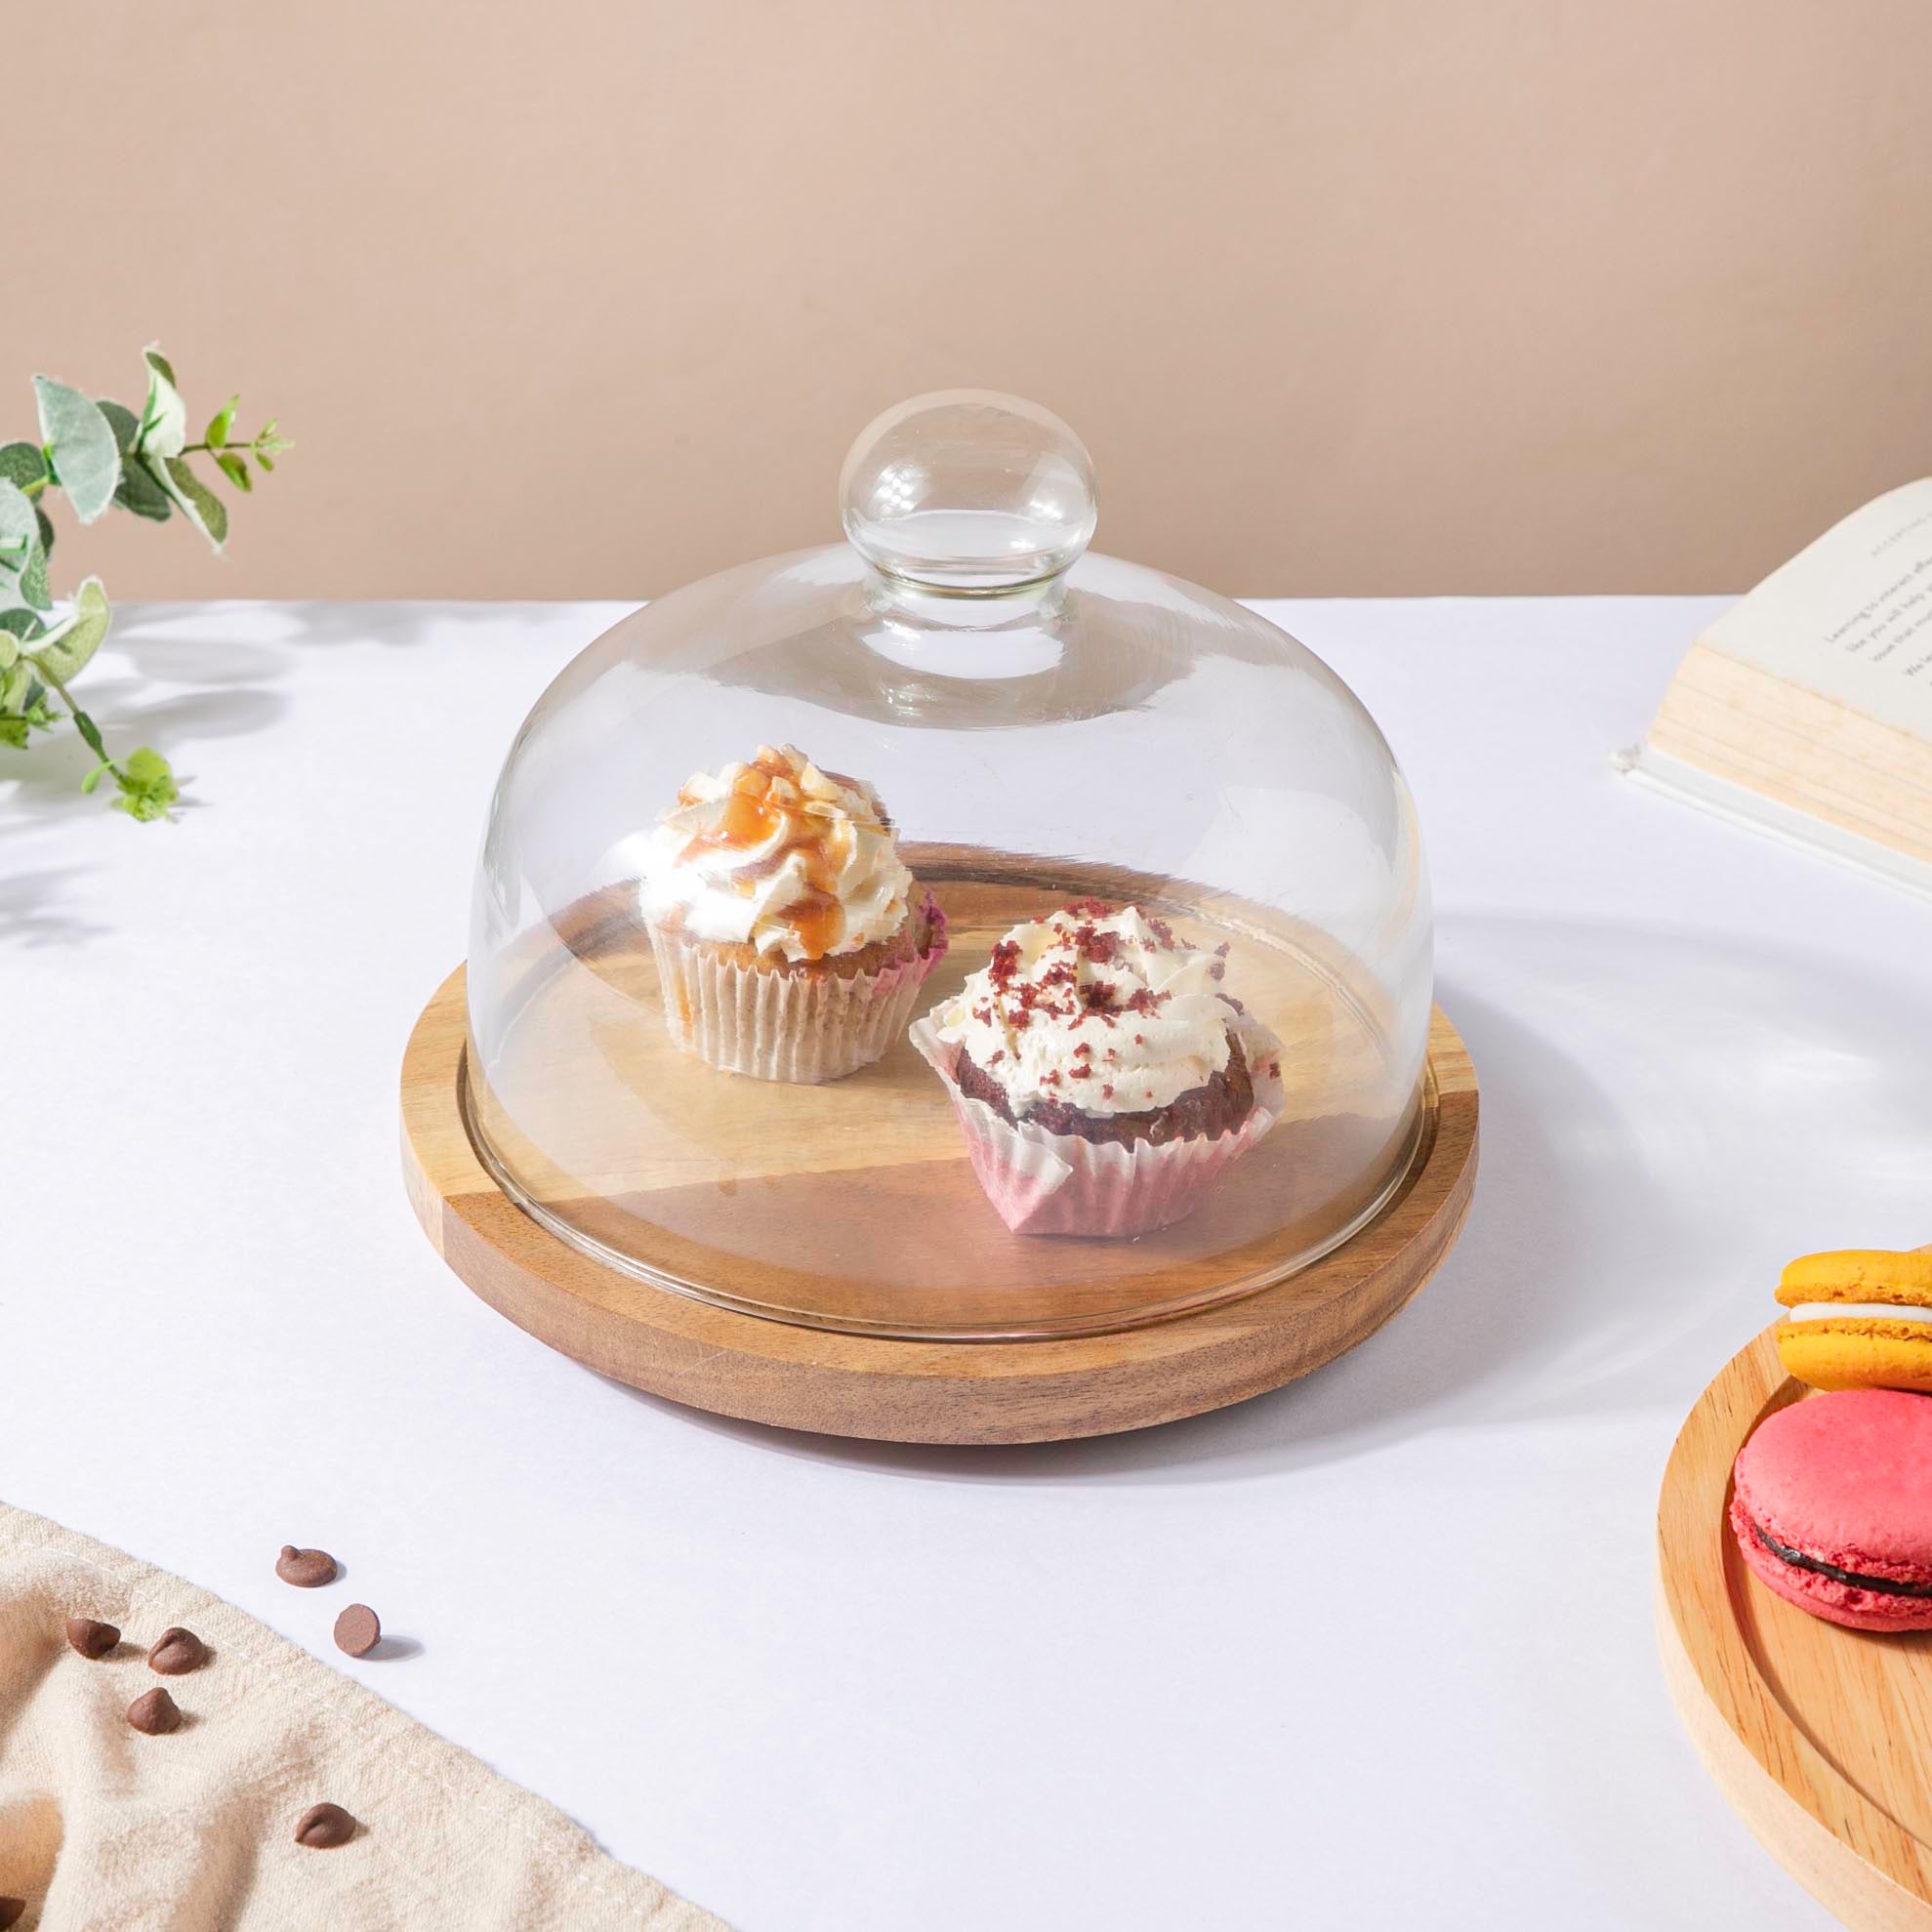 Amazon.com: Acacia Wood Cake Stand with Clear Acrylic Dome Cover - 6-in-1  Multifunctional Cake Holder, Serving Platter, Salad/ Punch Bowl, Veggie  Stand, Snack Tray - Extra Large : Home & Kitchen